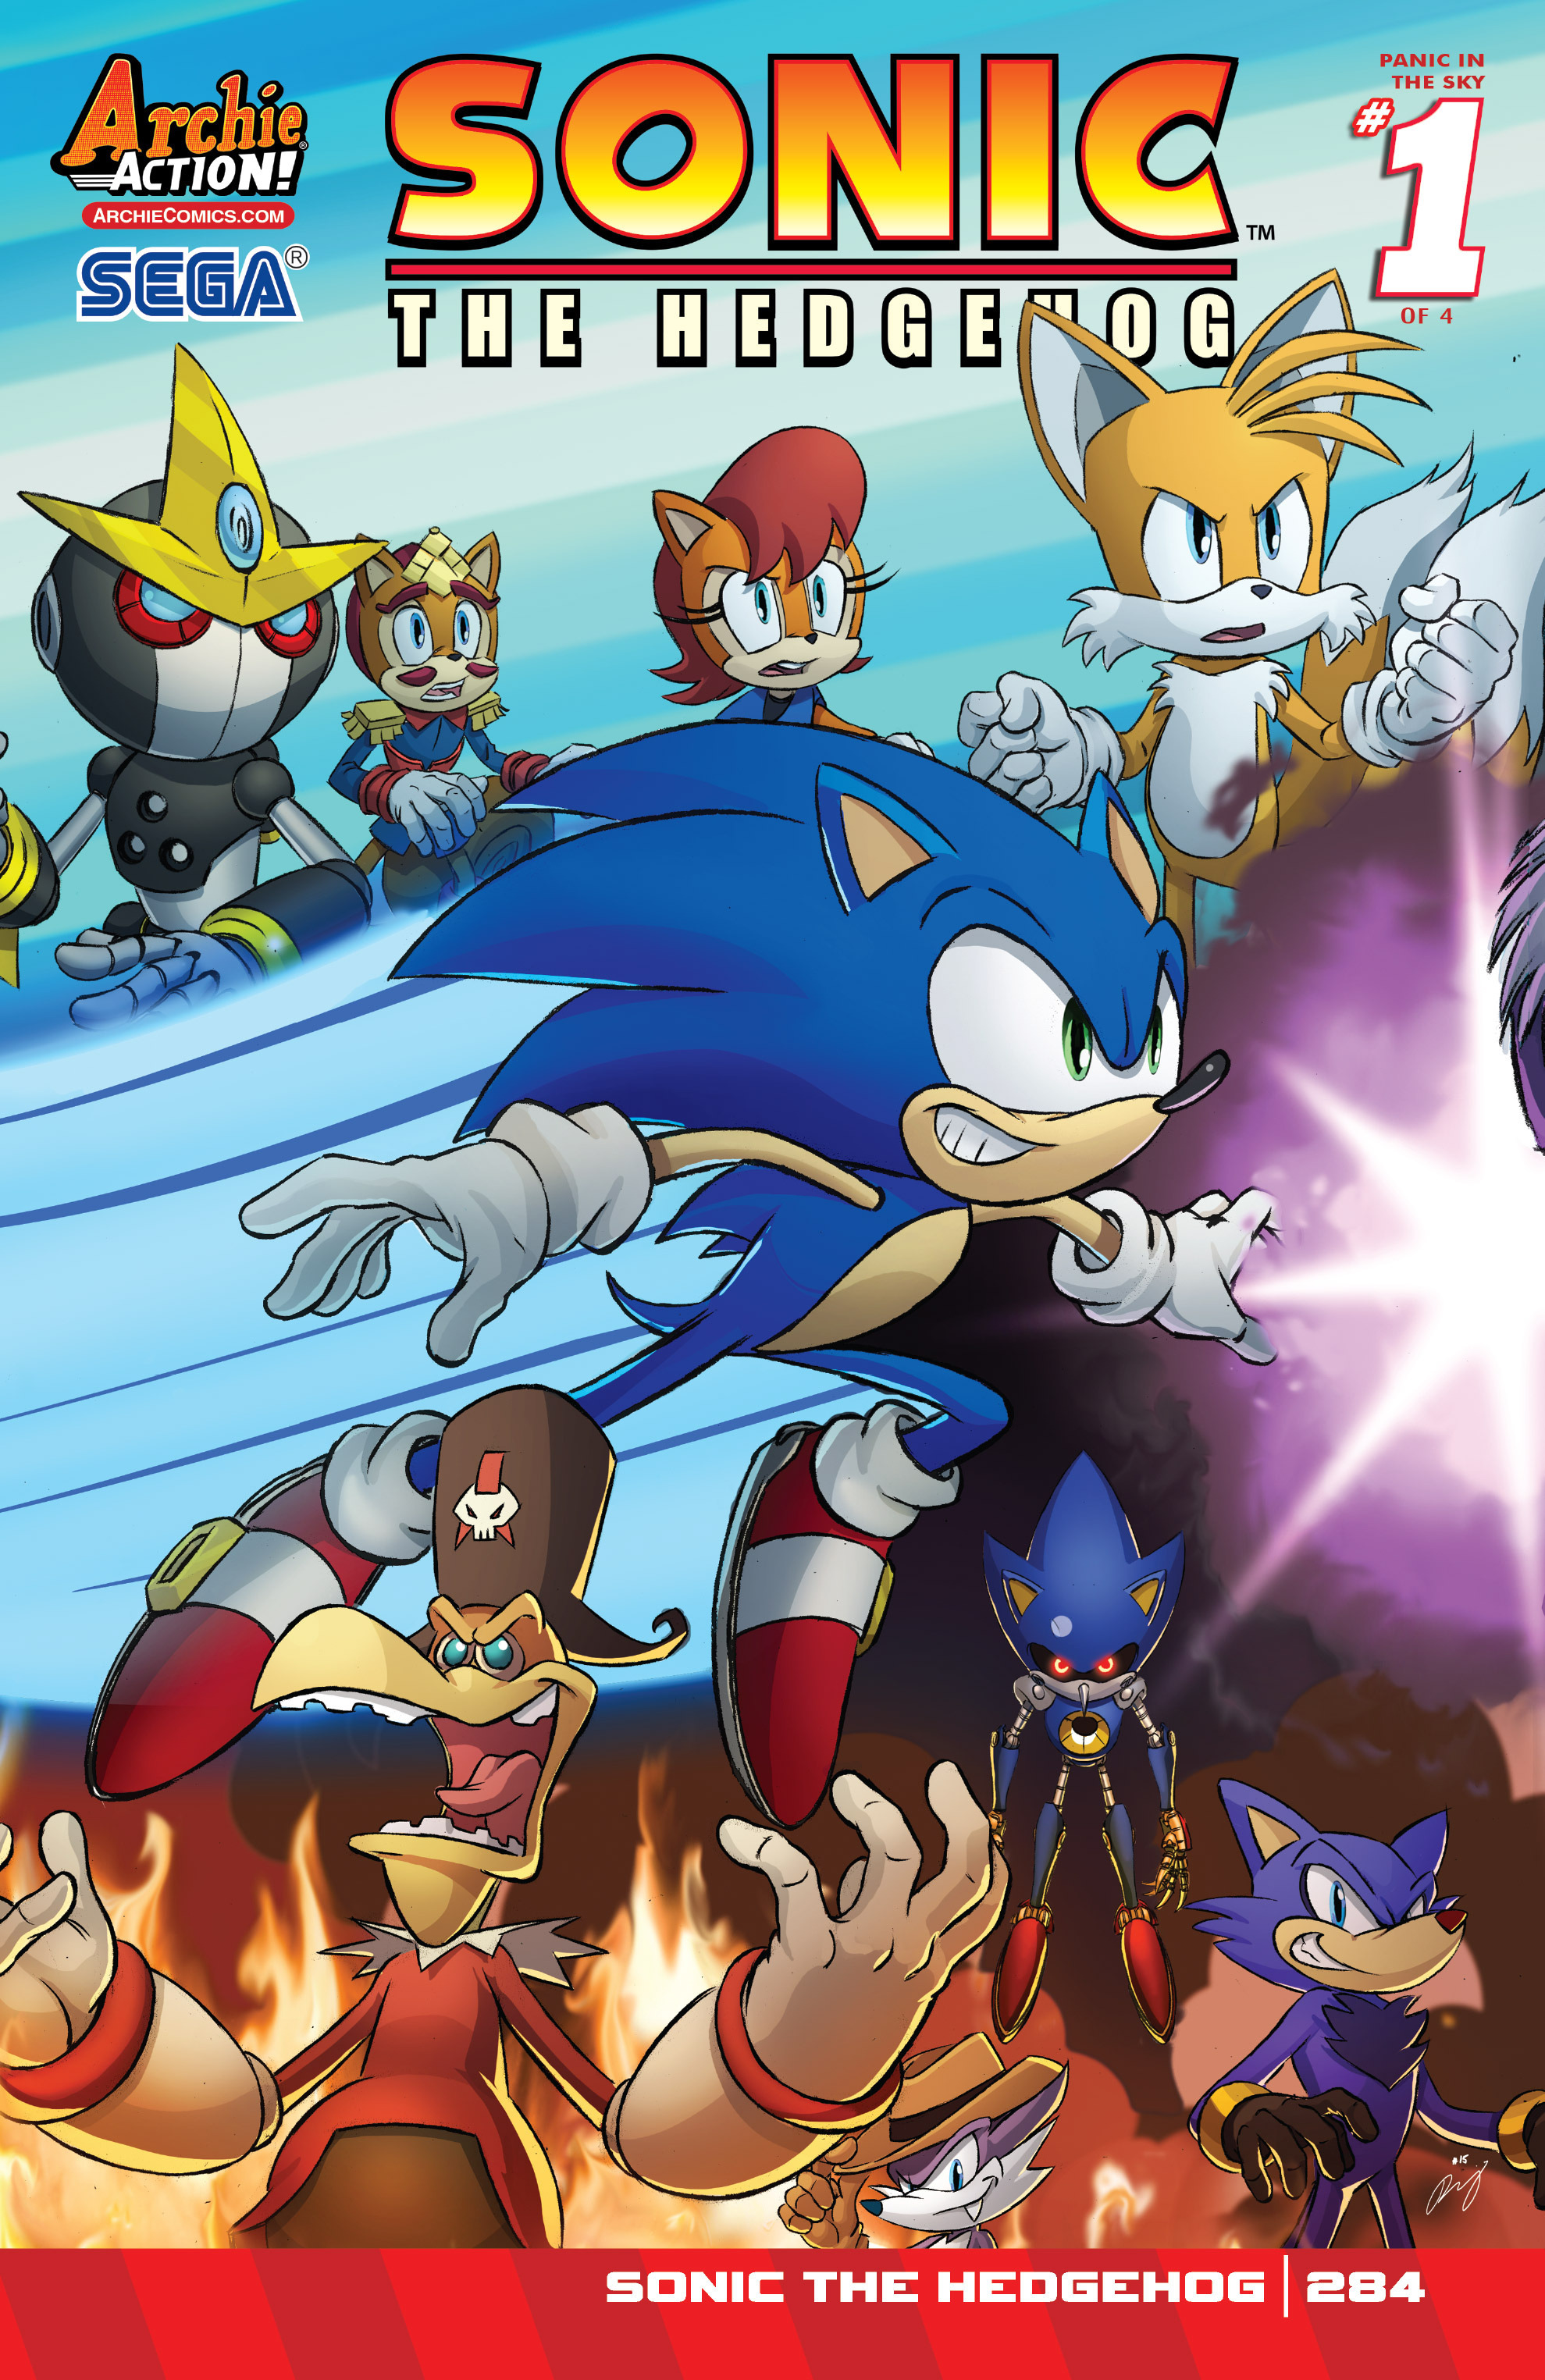 Archie Sonic the Hedgehog Issue 284 | Sonic News Network | FANDOM powered by Wikia